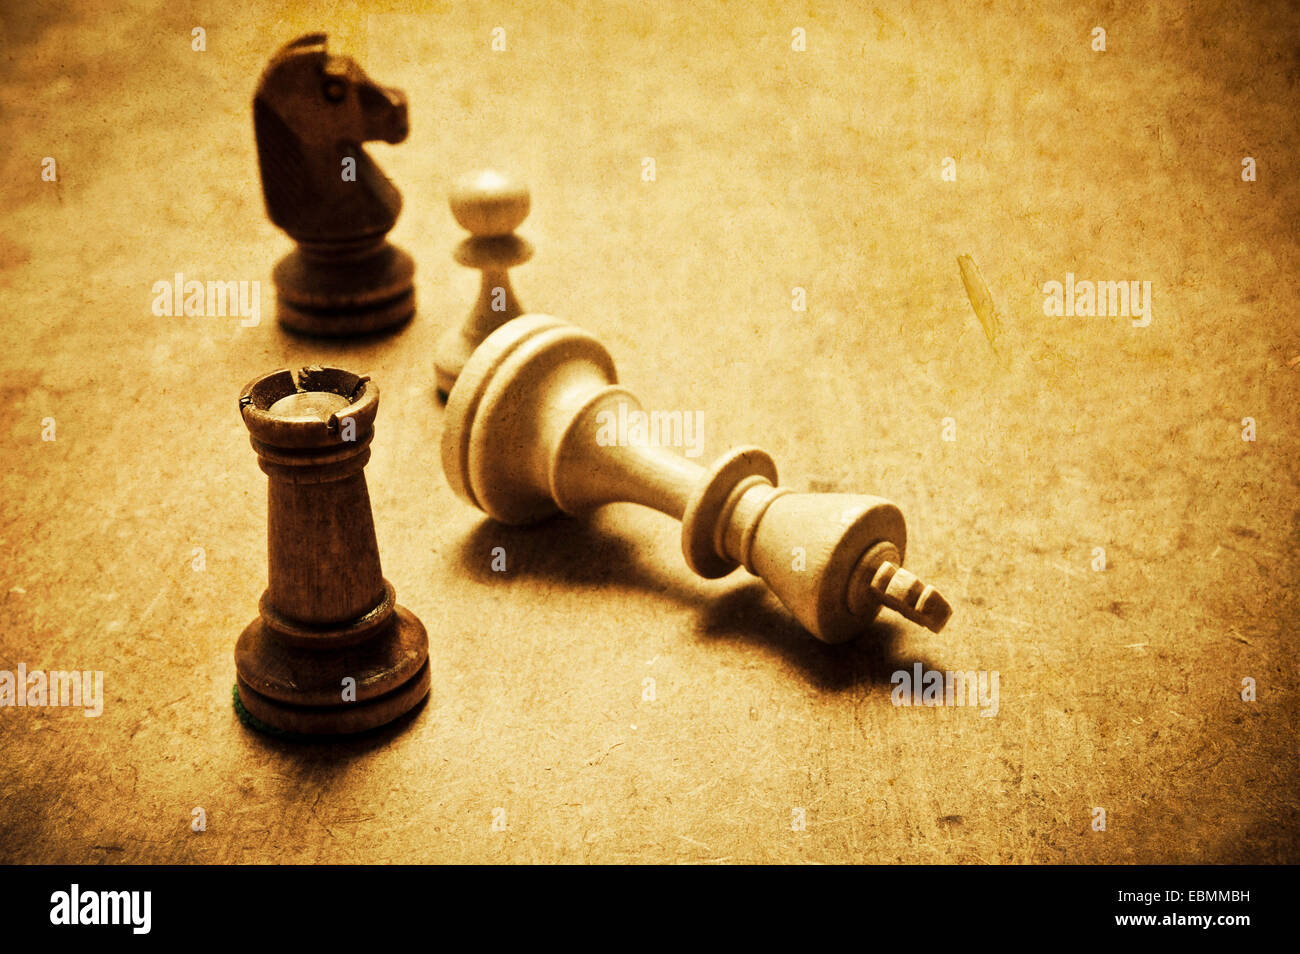 chess pieces grunge effect Stock Photo